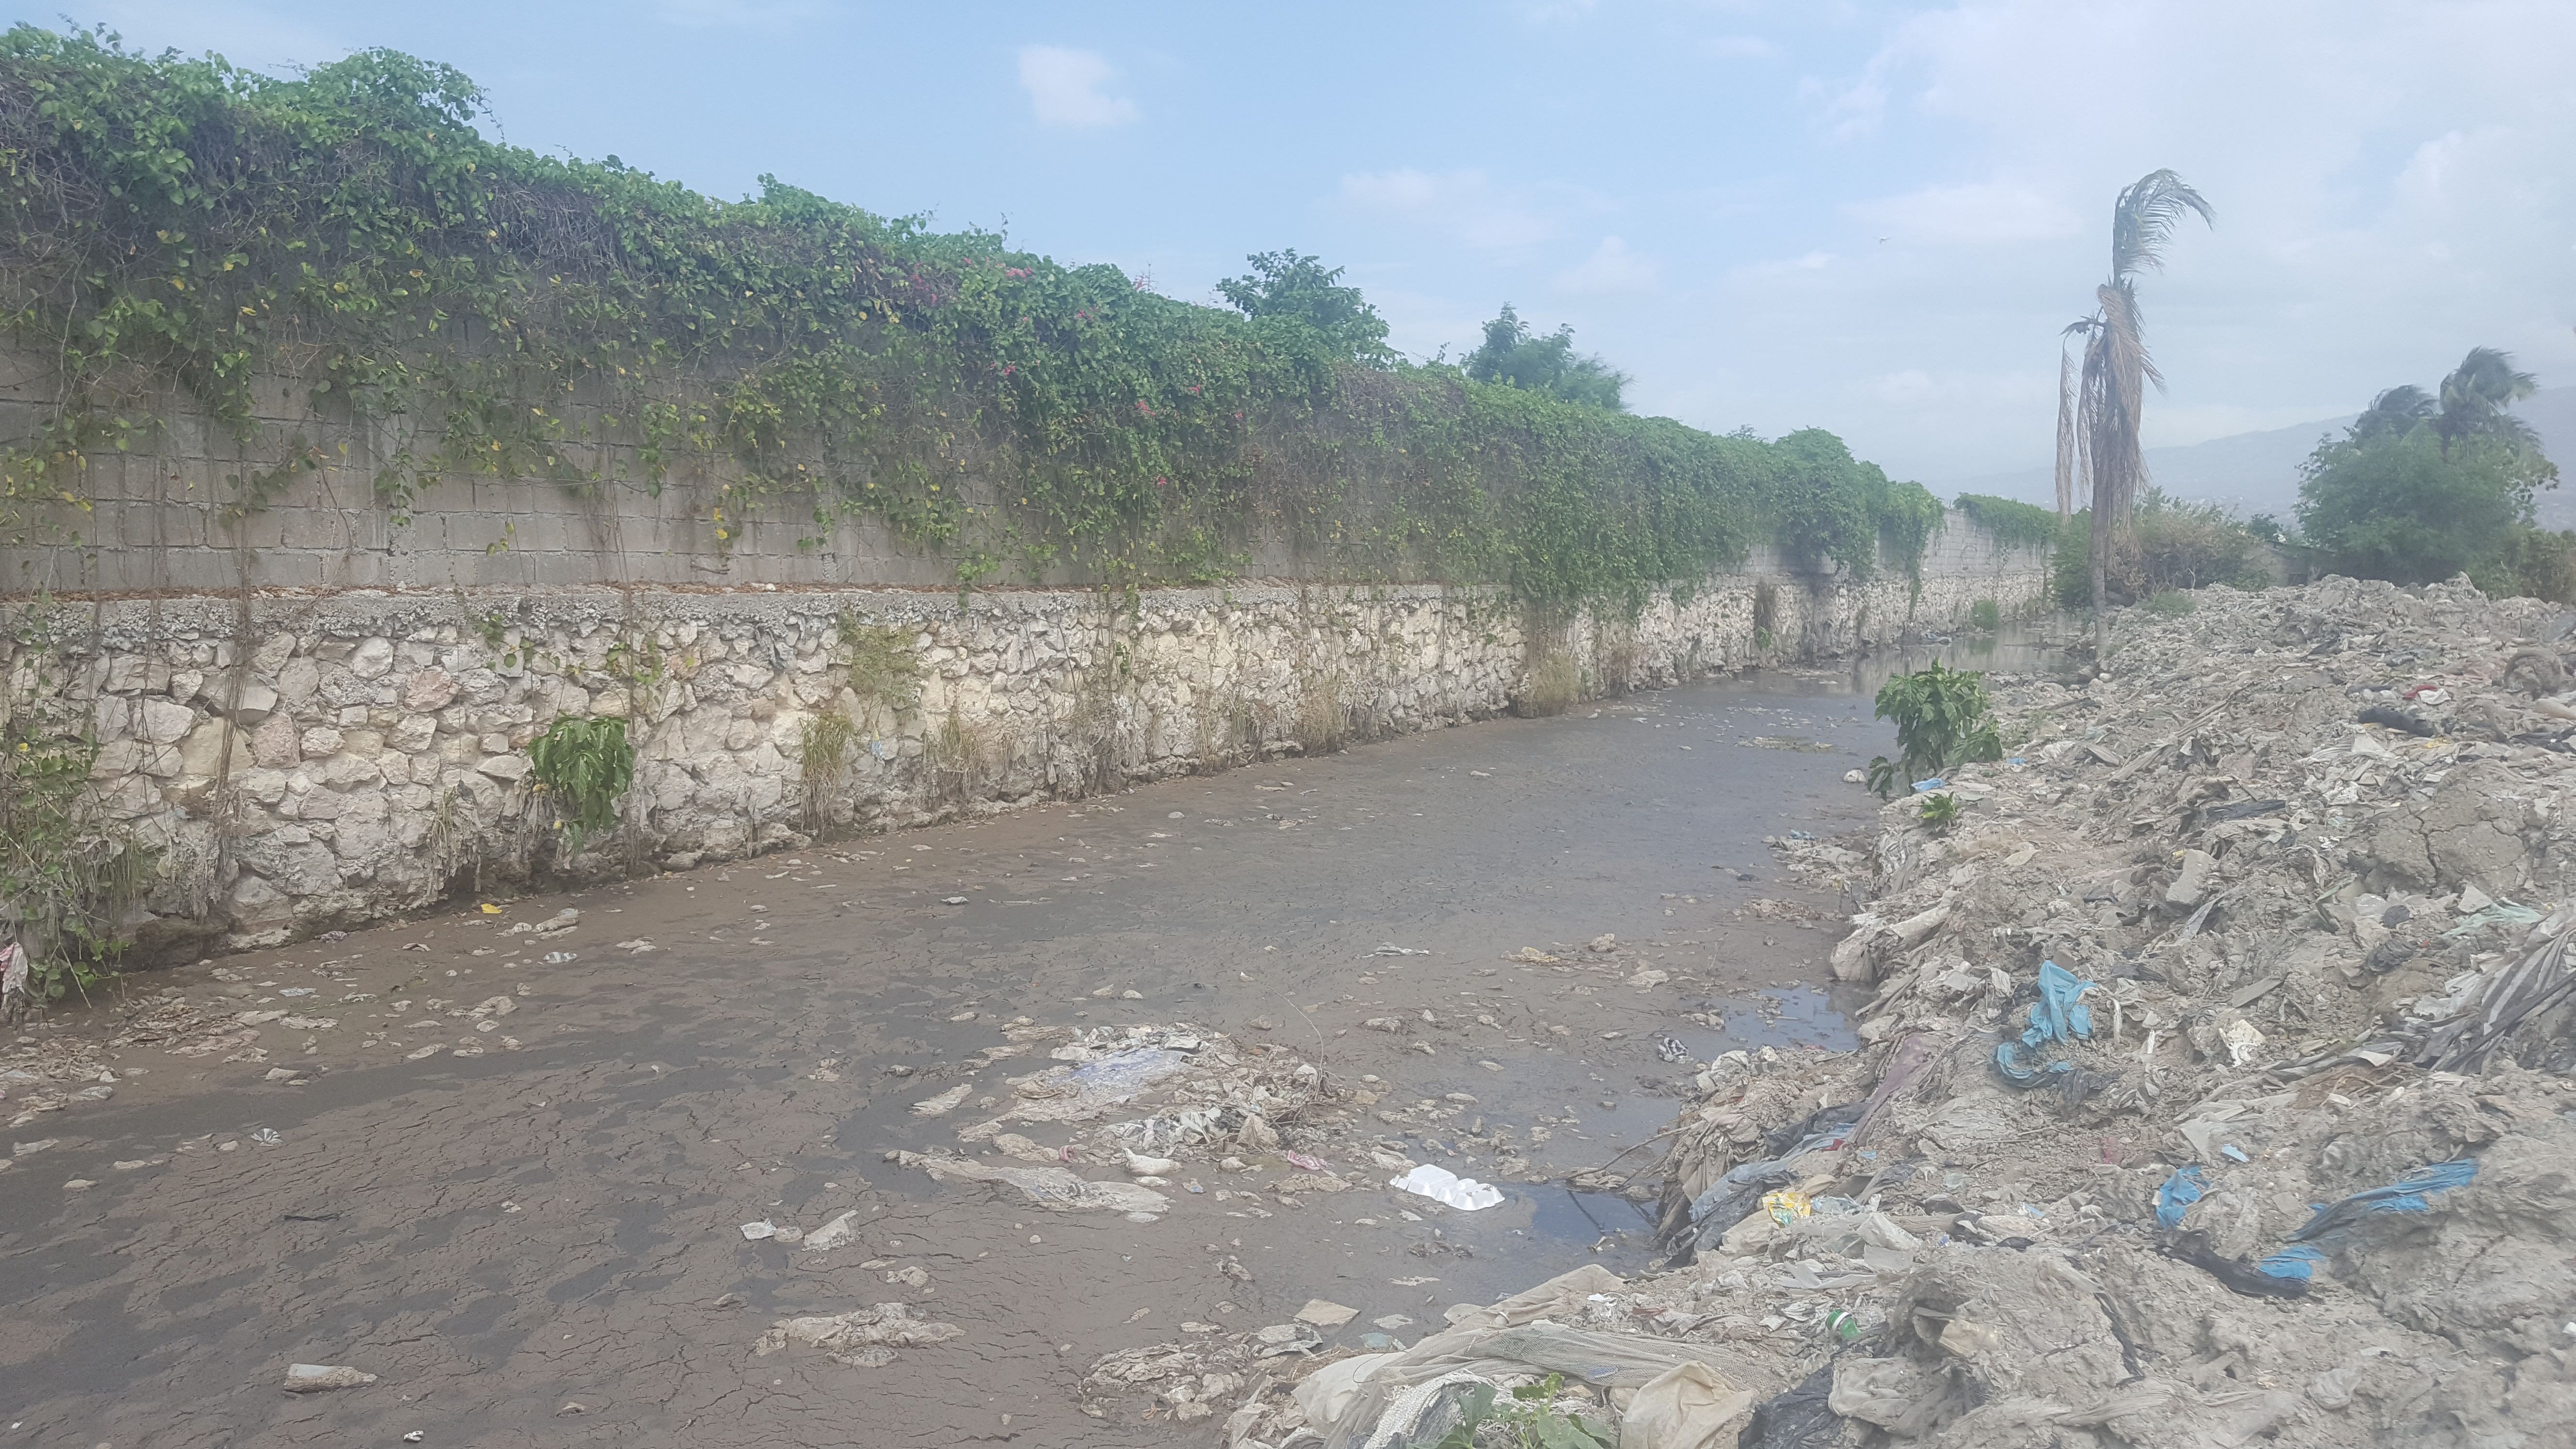 An open canal choked with raw sewage runs a few feet behind family homes in Cite Soleil. When it rains, the canals quickly overflow and flood the community with three feet or more of dangerous water and sludge. Image by Rebecca Hersher. Haiti, 2017.